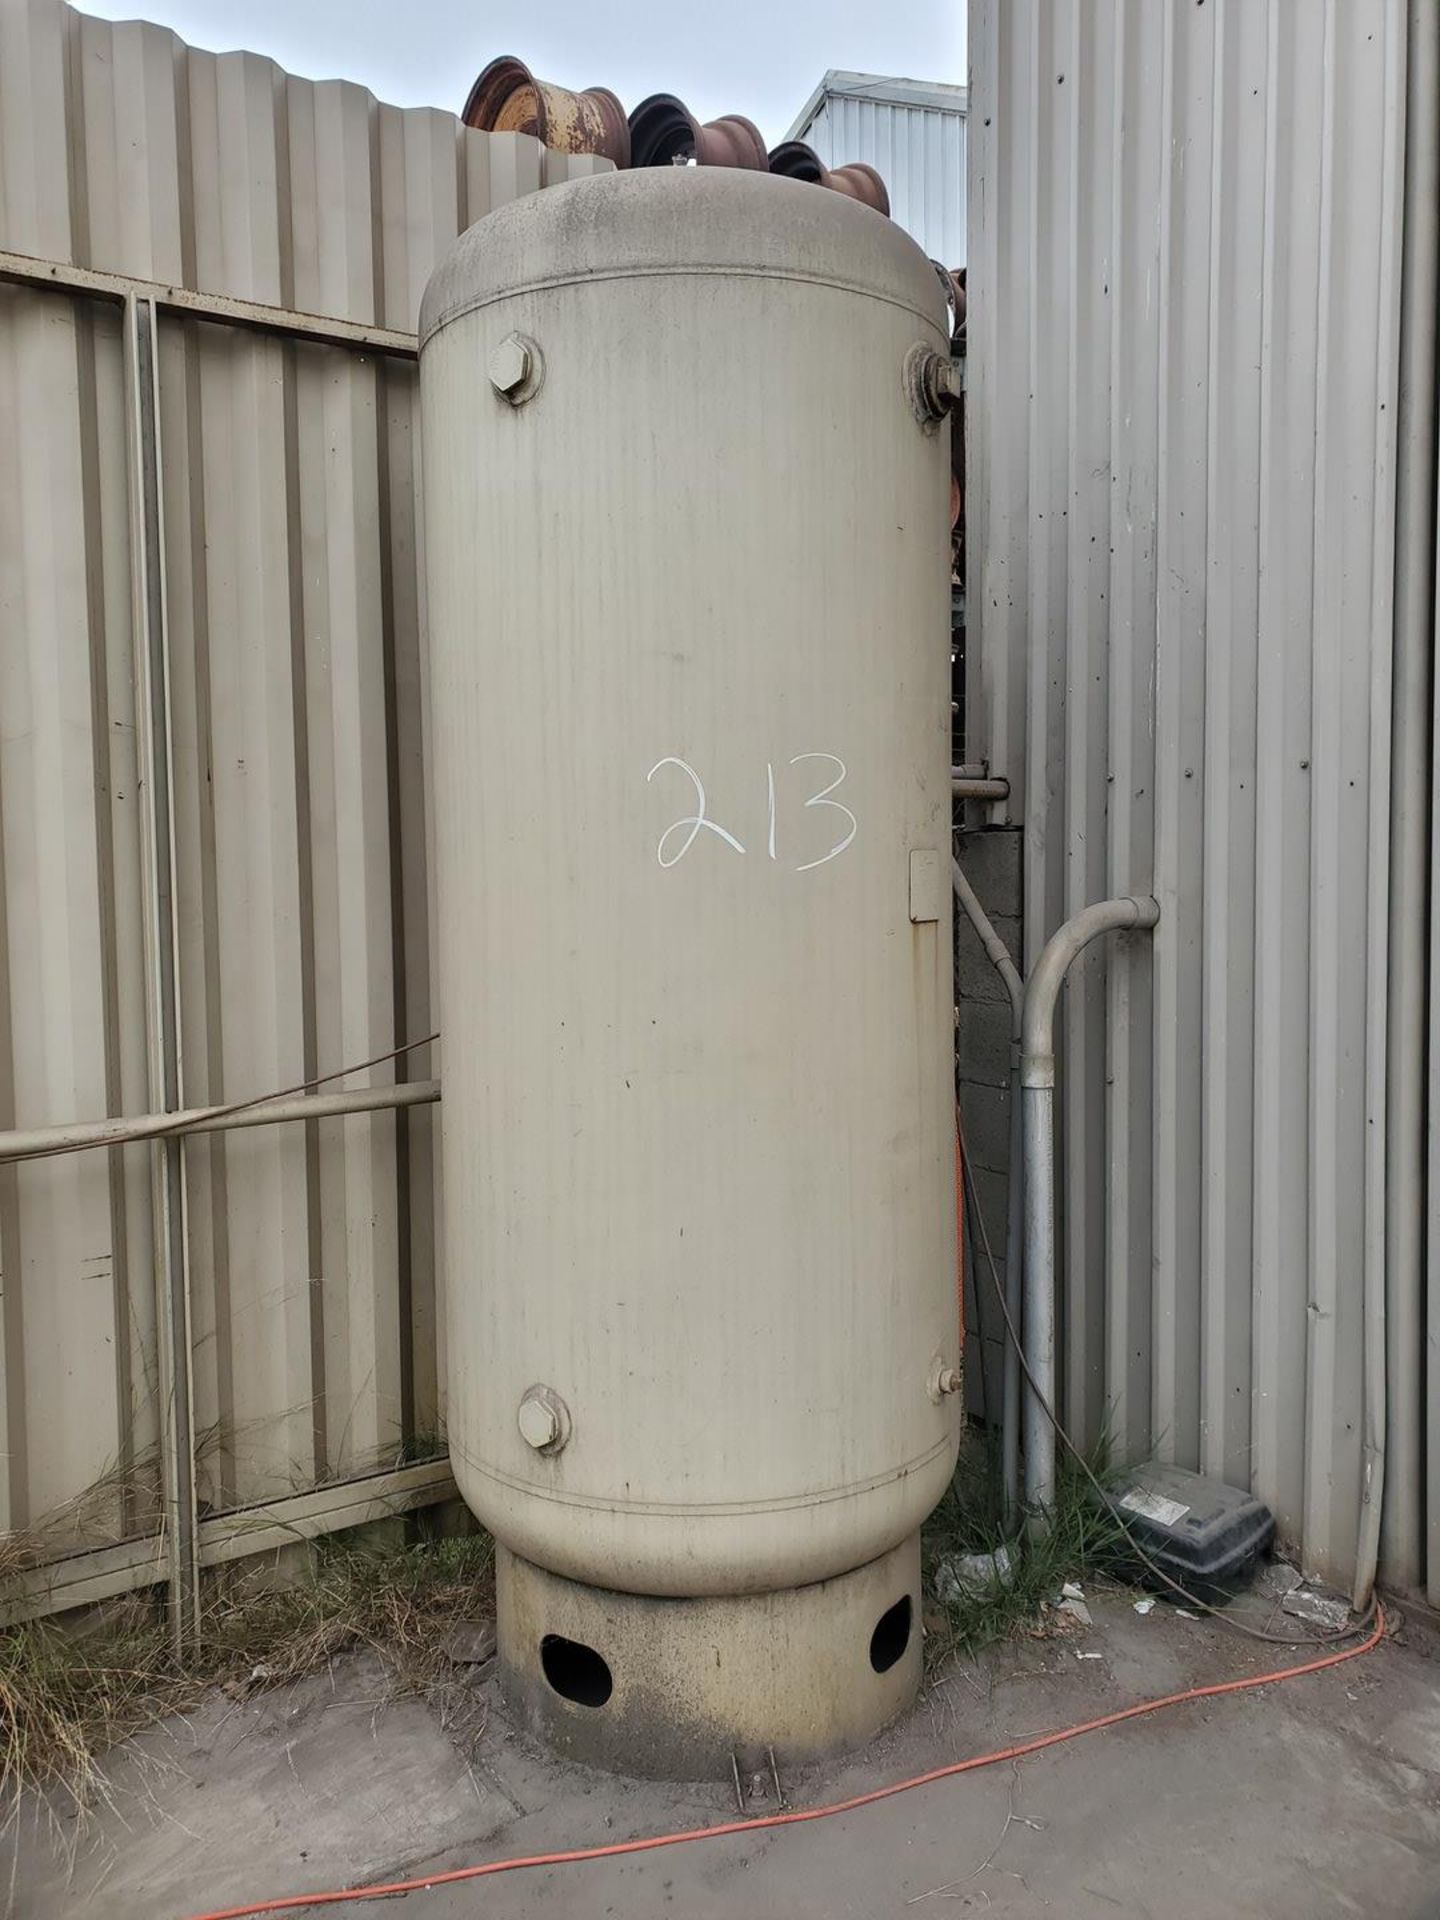 2008 Manchester Tank Receiver Tank MAWP: 165psi@650F, MDMT: -20F@165psi, 400gal - Image 2 of 4